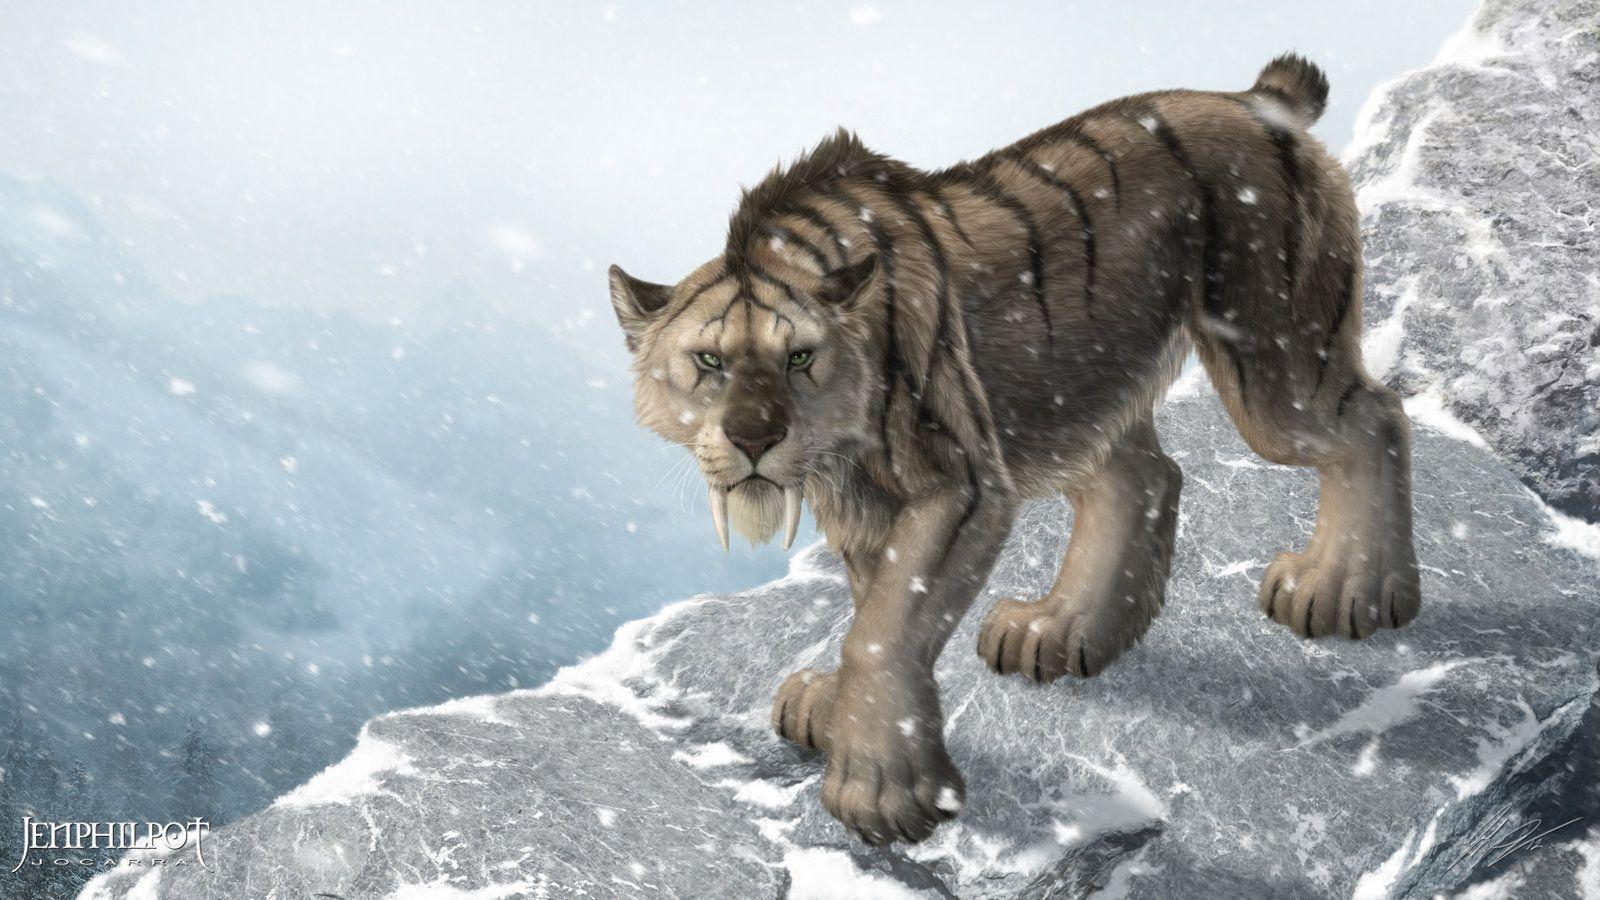 Saber Tooth Tiger Wallpapers.